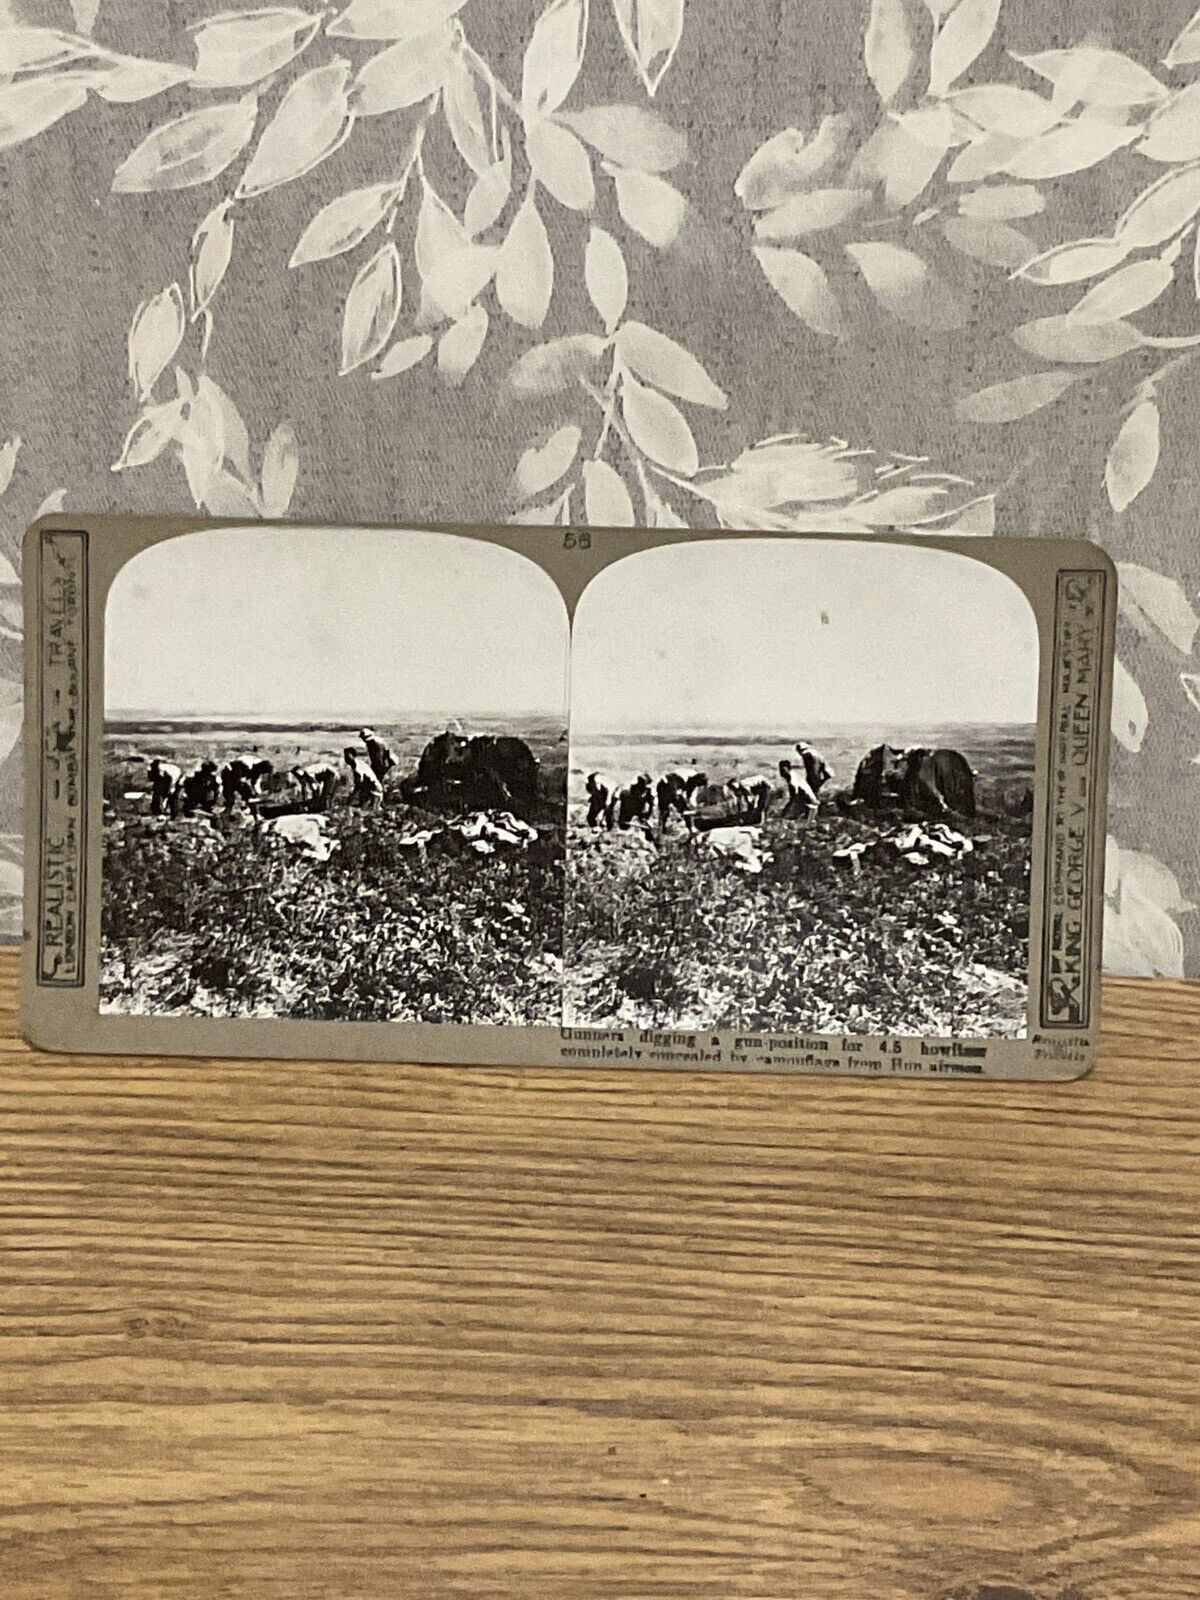 WW1 Stereo Viewing Card Vintage Stereoscope Photographs -Historical Memorabilia 